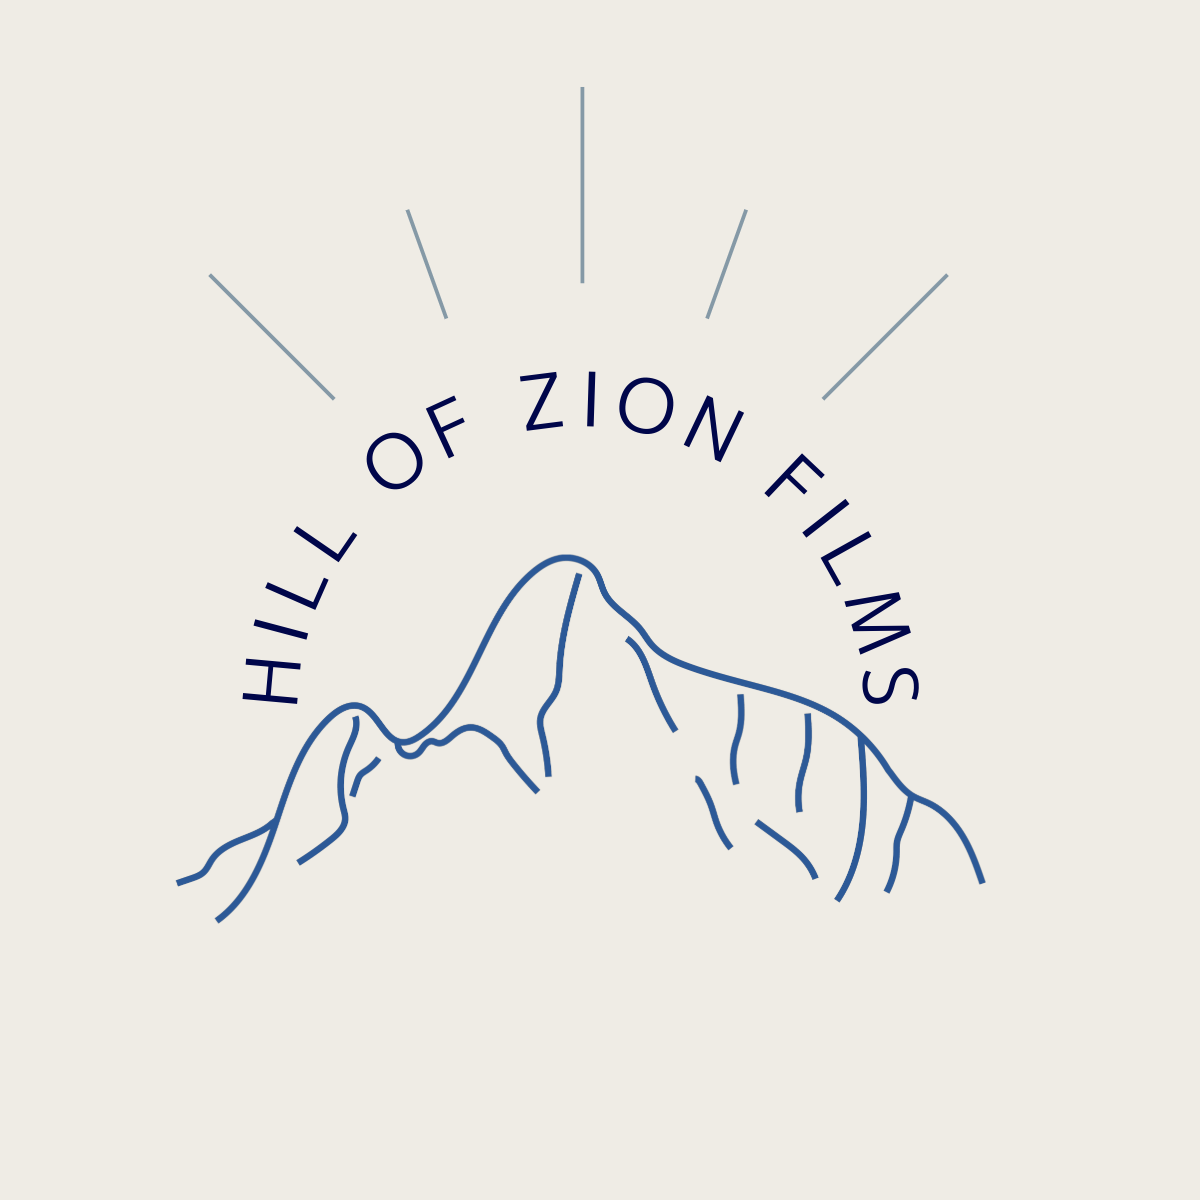 Hill of Zion Films